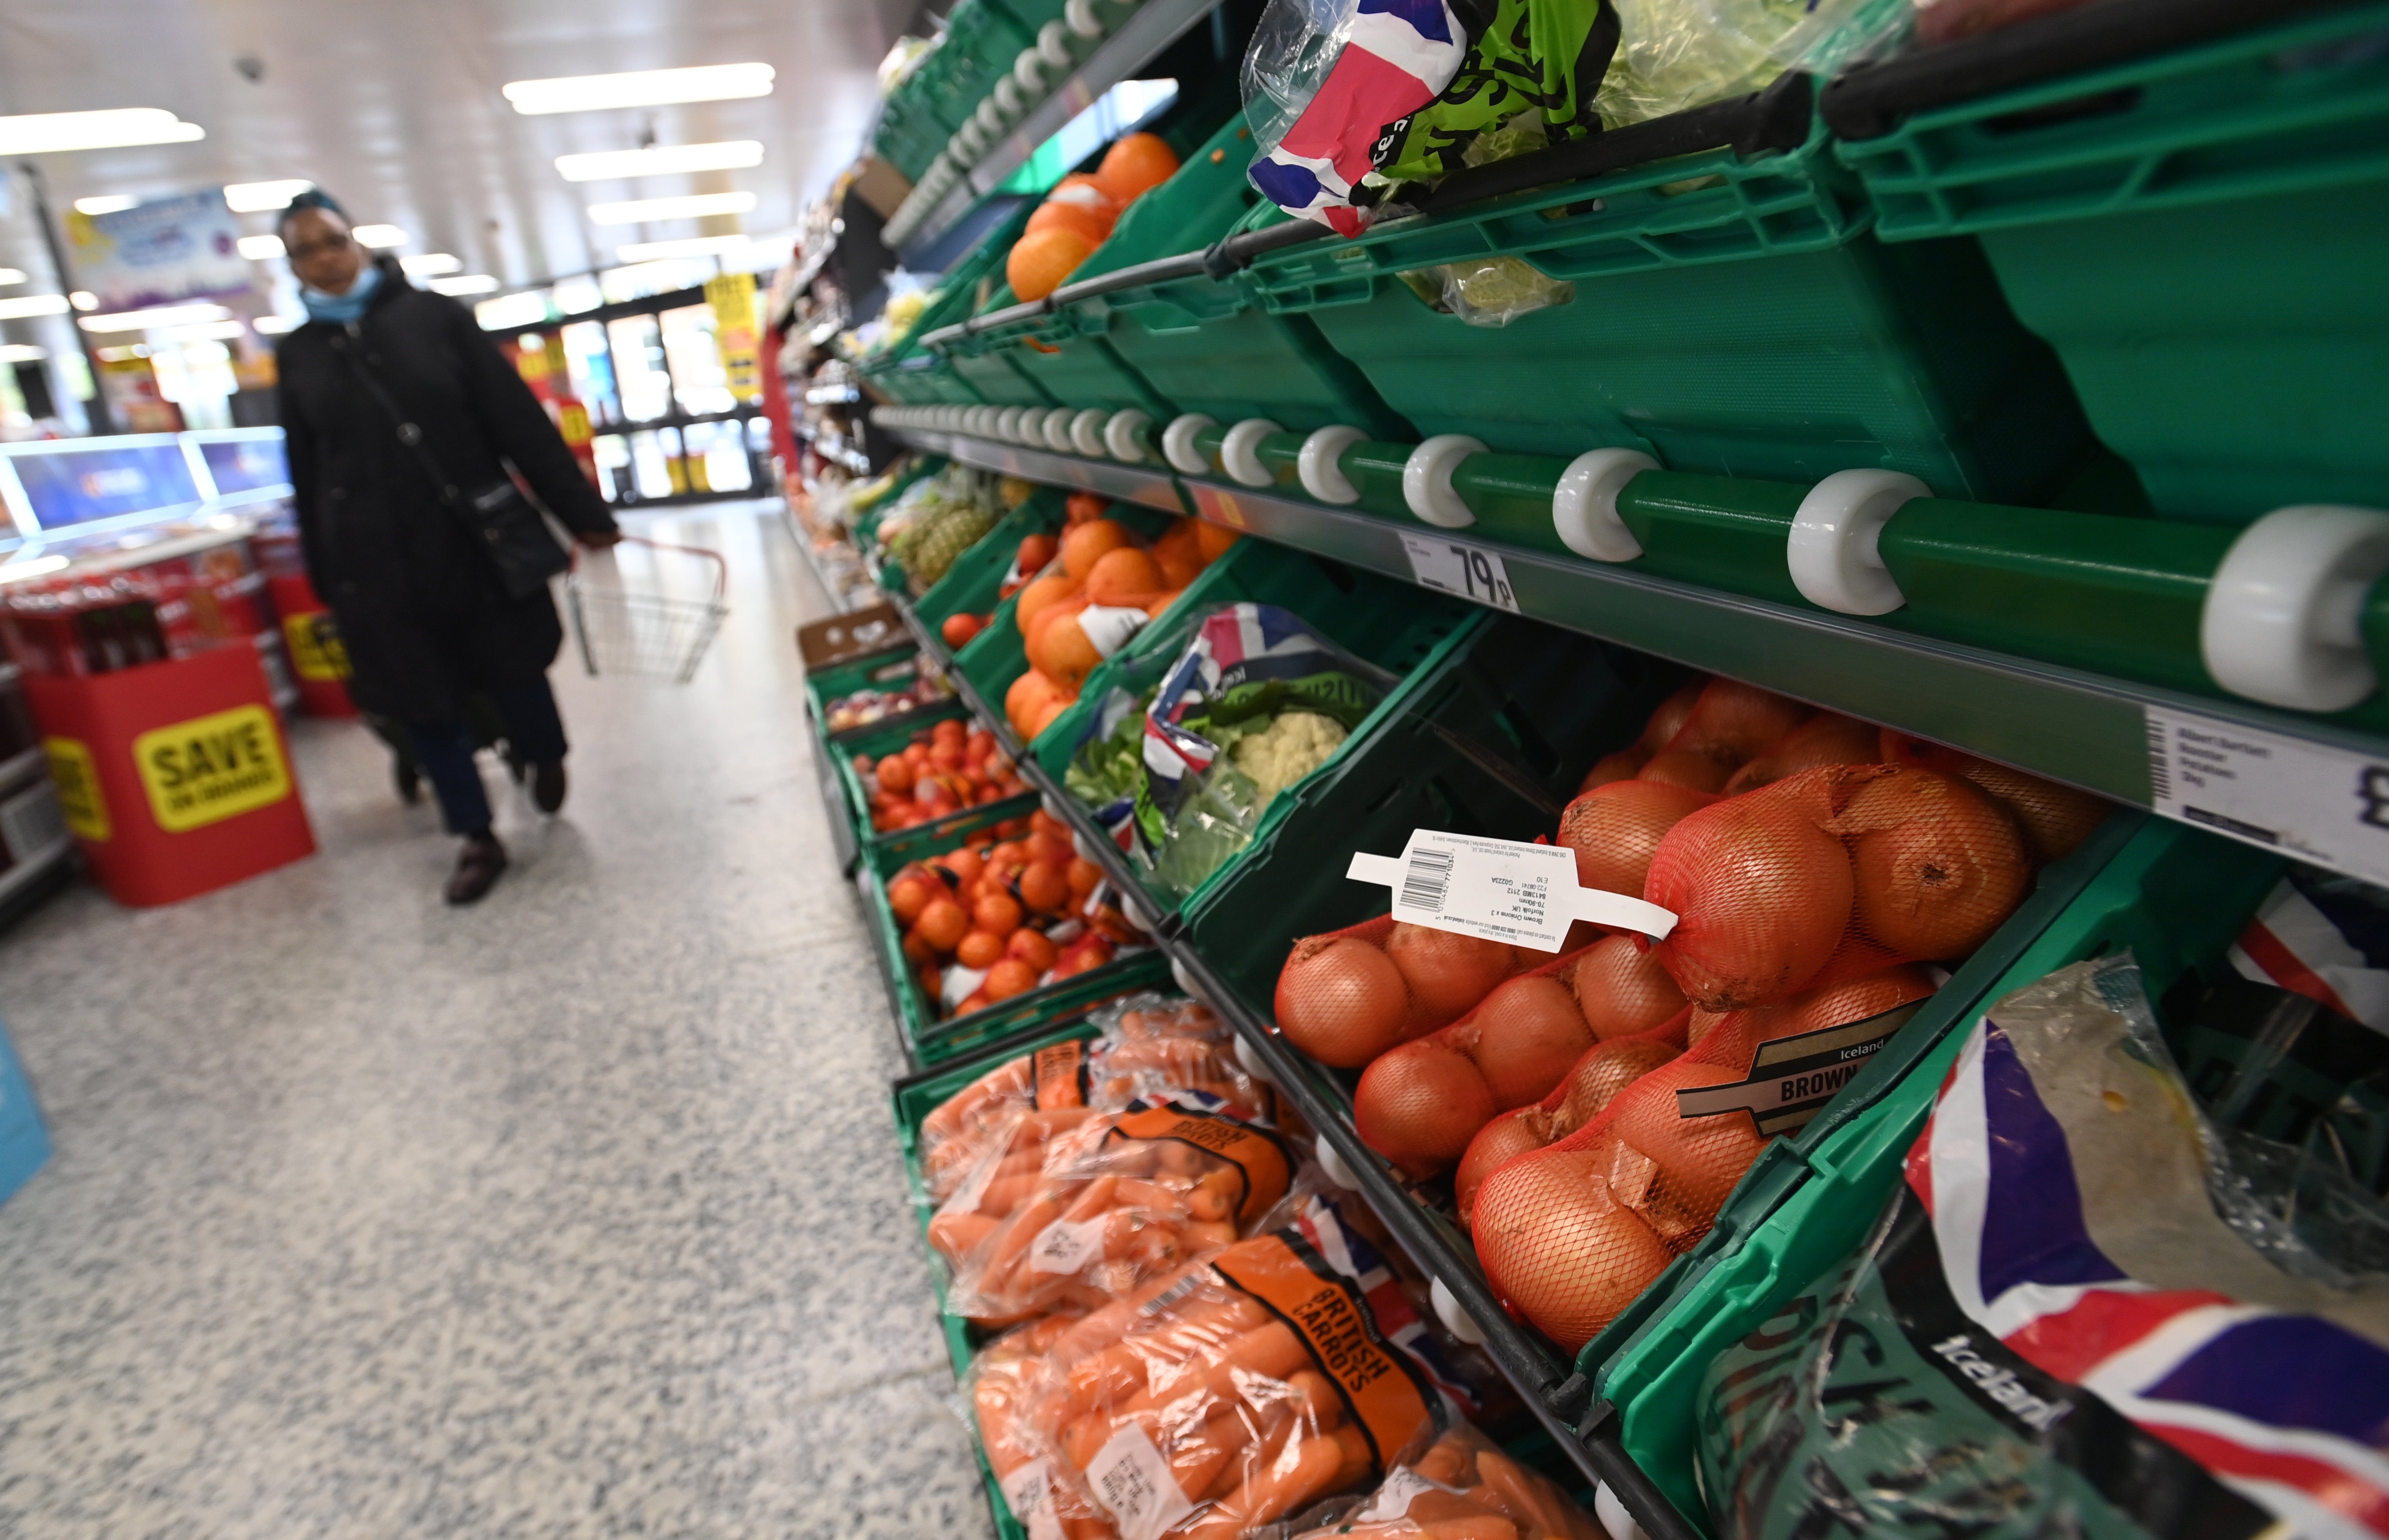 The cost of food has increased by 9.3% in the past year